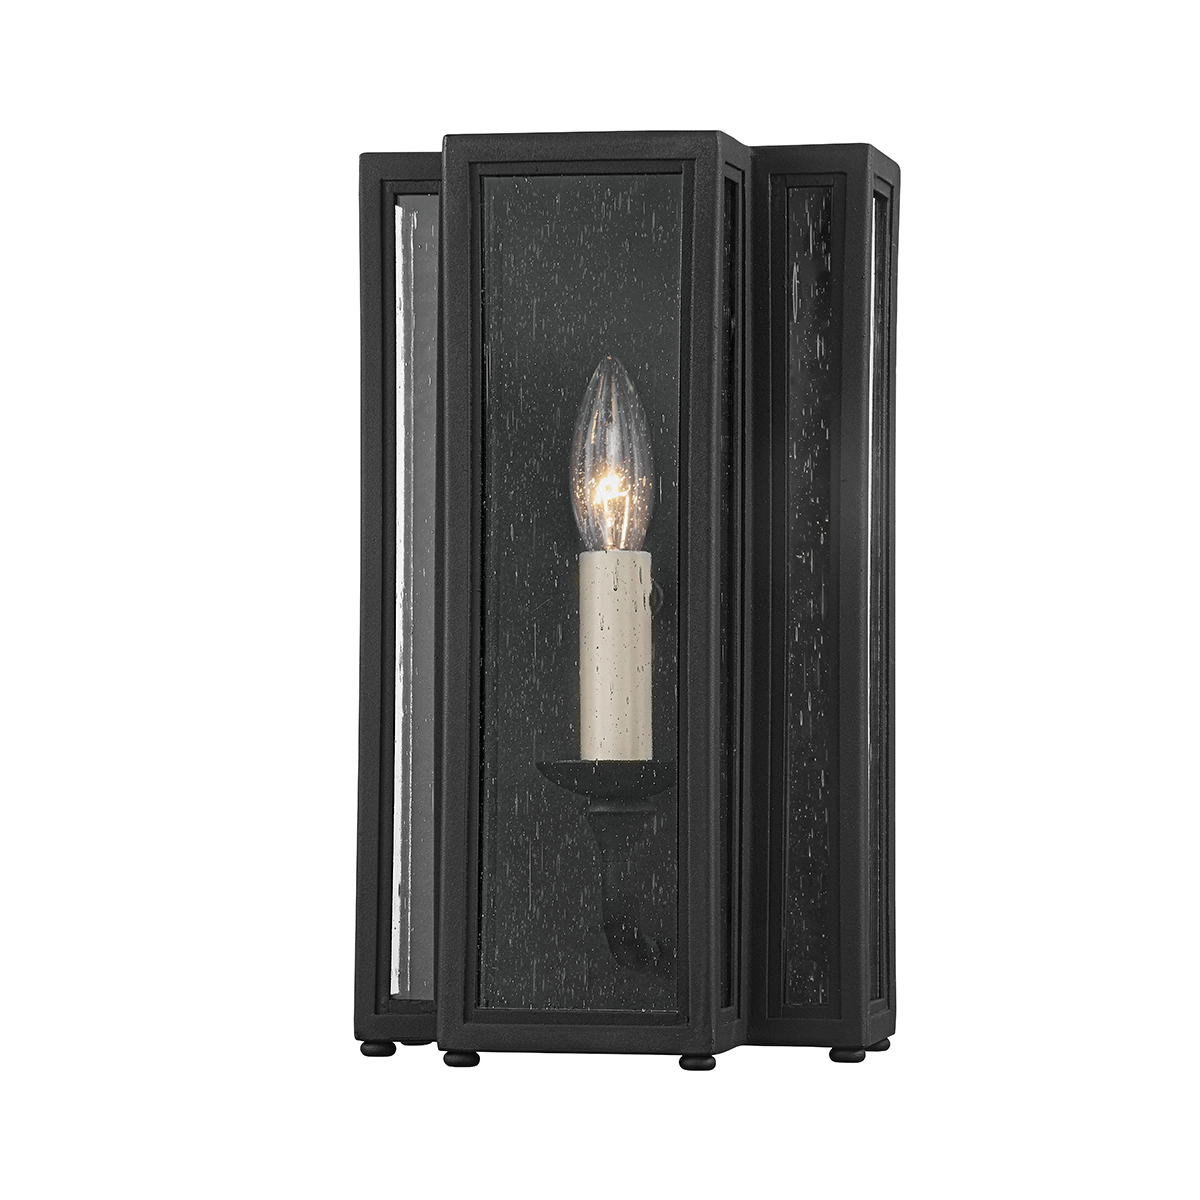 Troy LEOR 1 LIGHT SMALL EXTERIOR WALL SCONCE B3601 Outdoor l Wall Troy Lighting TEXTURE BLACK  